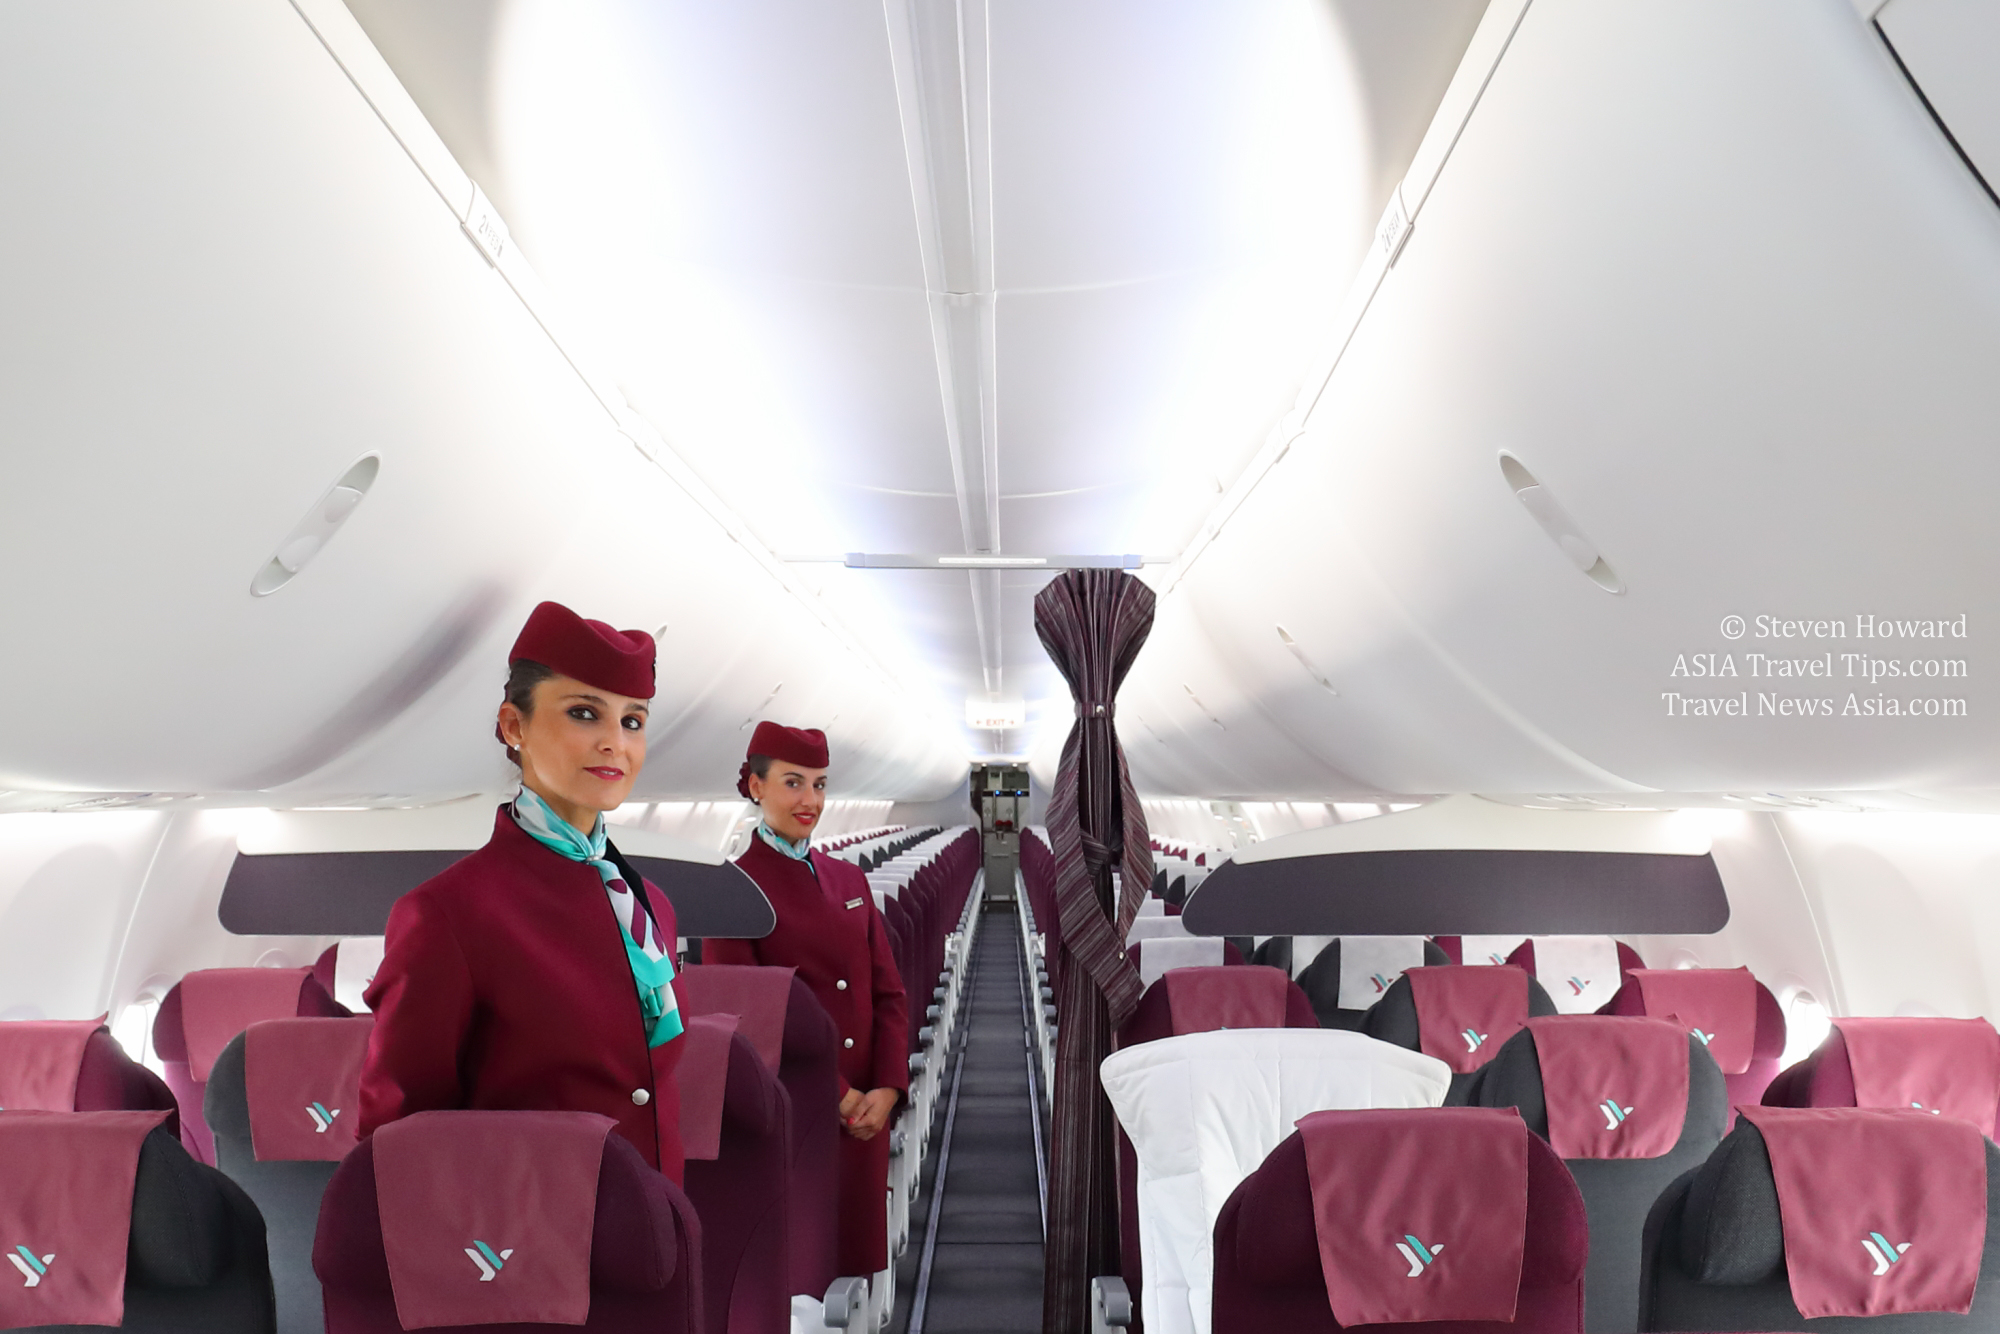 Two beautiful Air Italy stewardesses pose onboard one of the airline's Boeing 737 MAX 8 aircraft. Picture by Steven Howard of TravelNewsAsia.com Click to enlarge.